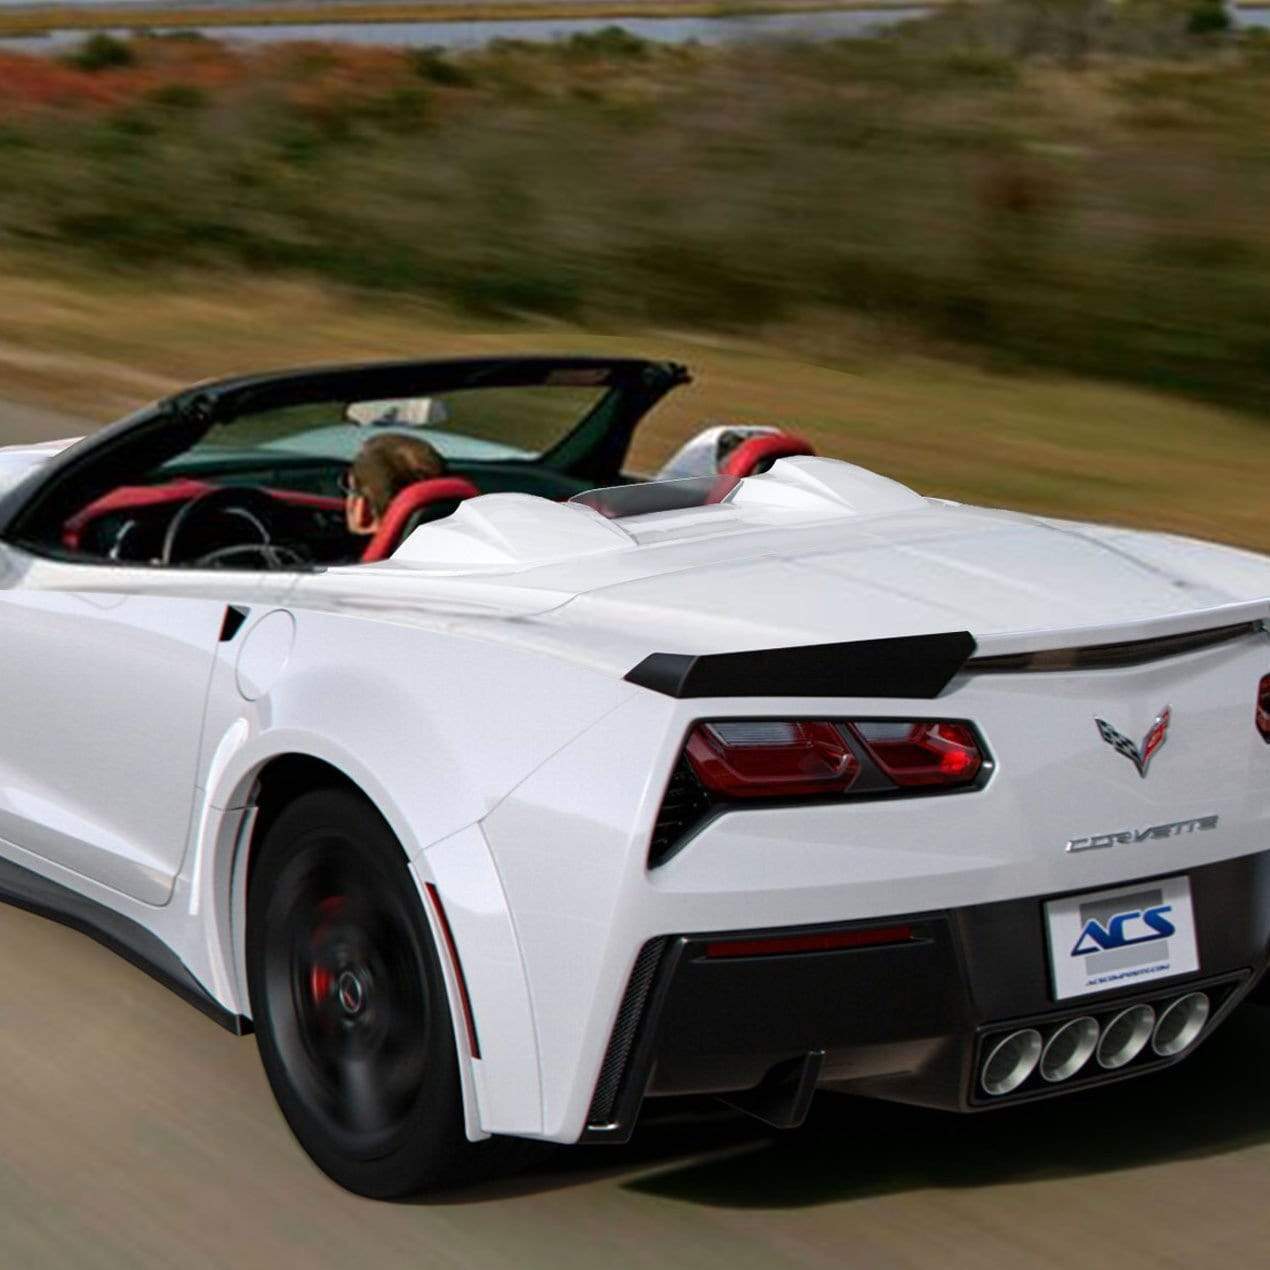 ACS Composite Convertible Rear Widebody Kit with Z06 Scoop for C7 Corvette Stingray Convertible, SKU 45-4-103 PRM.